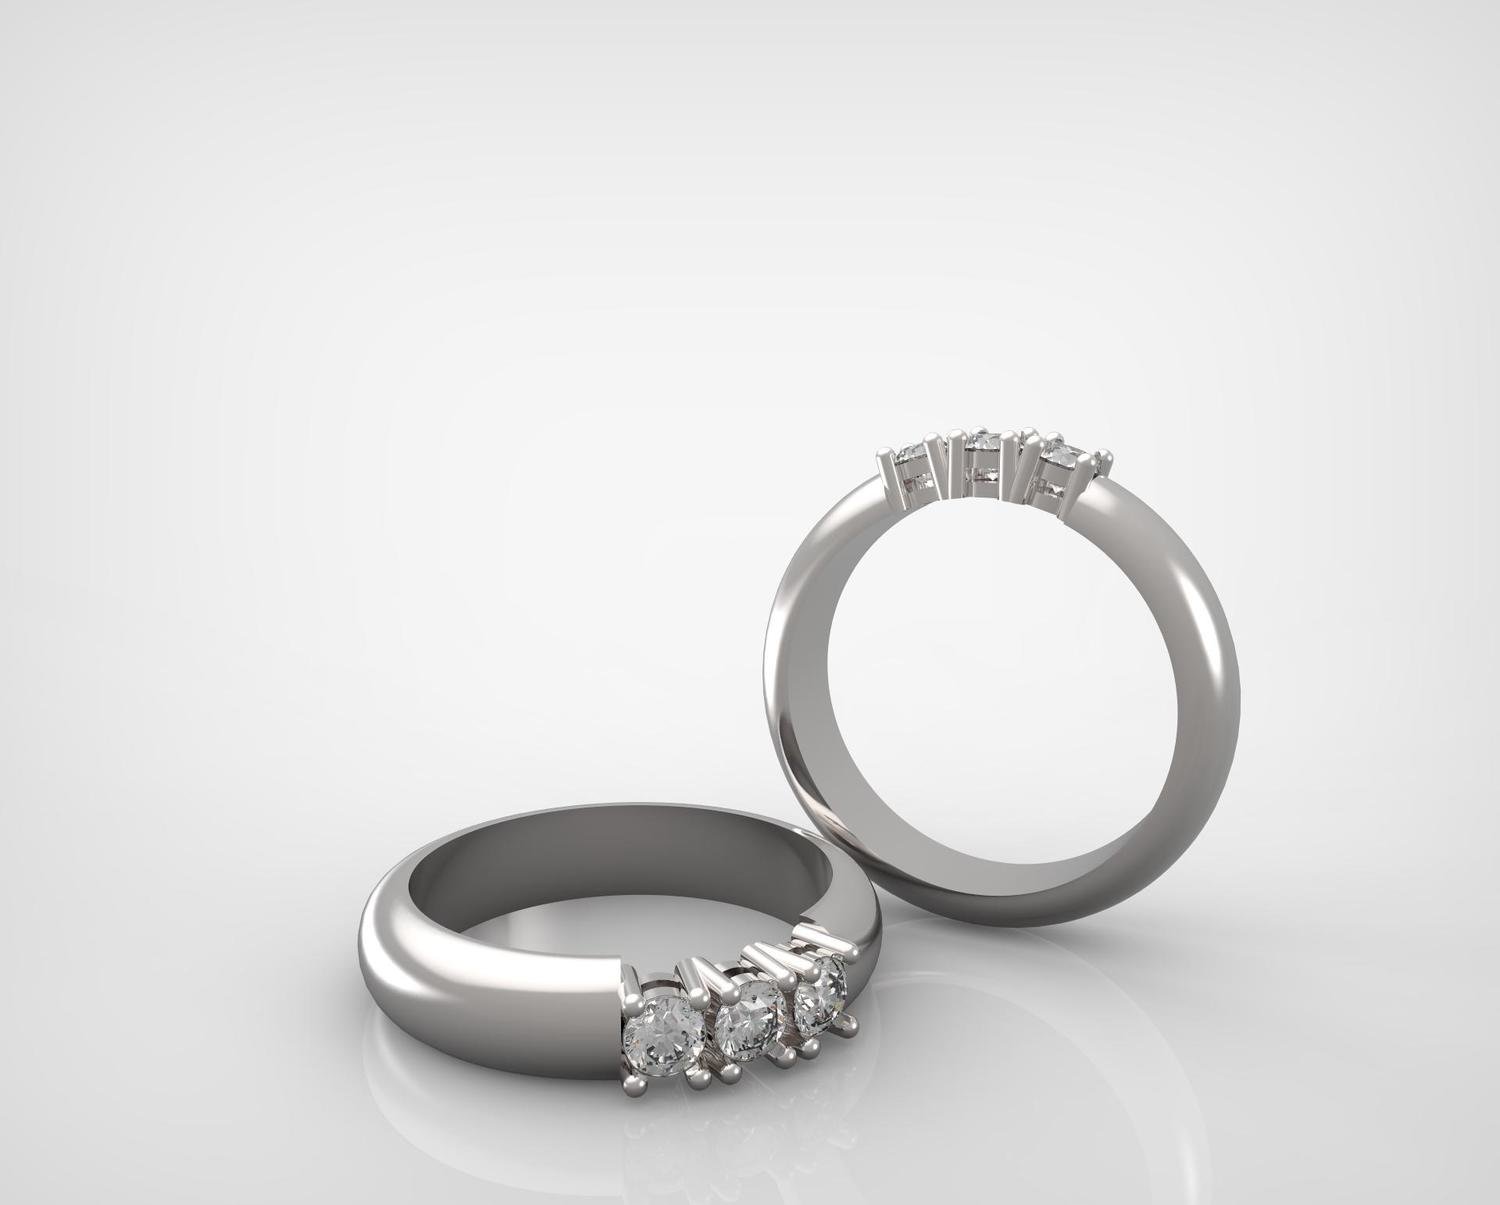 3D CAD Model of Diamond Engagement Ring